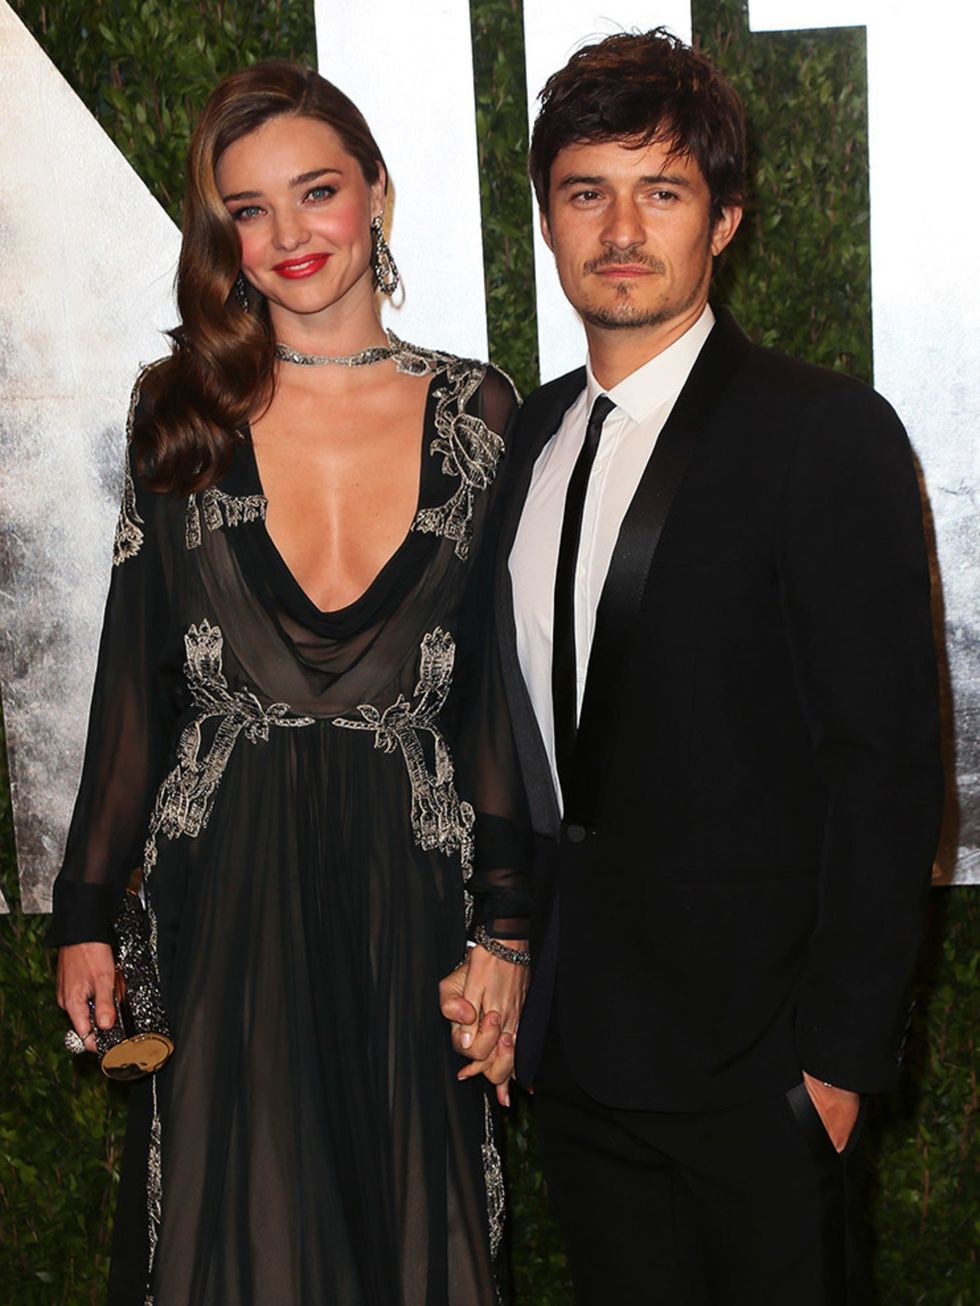 <p>Miranda Kerr and Orlando Bloom<br />
<br />
Despite announcing their separation in 2013, Kerr and Bloom - who have a son together and were married for three years - are reportedly the best of friends. The two were even said to have left the 2015 Oscars